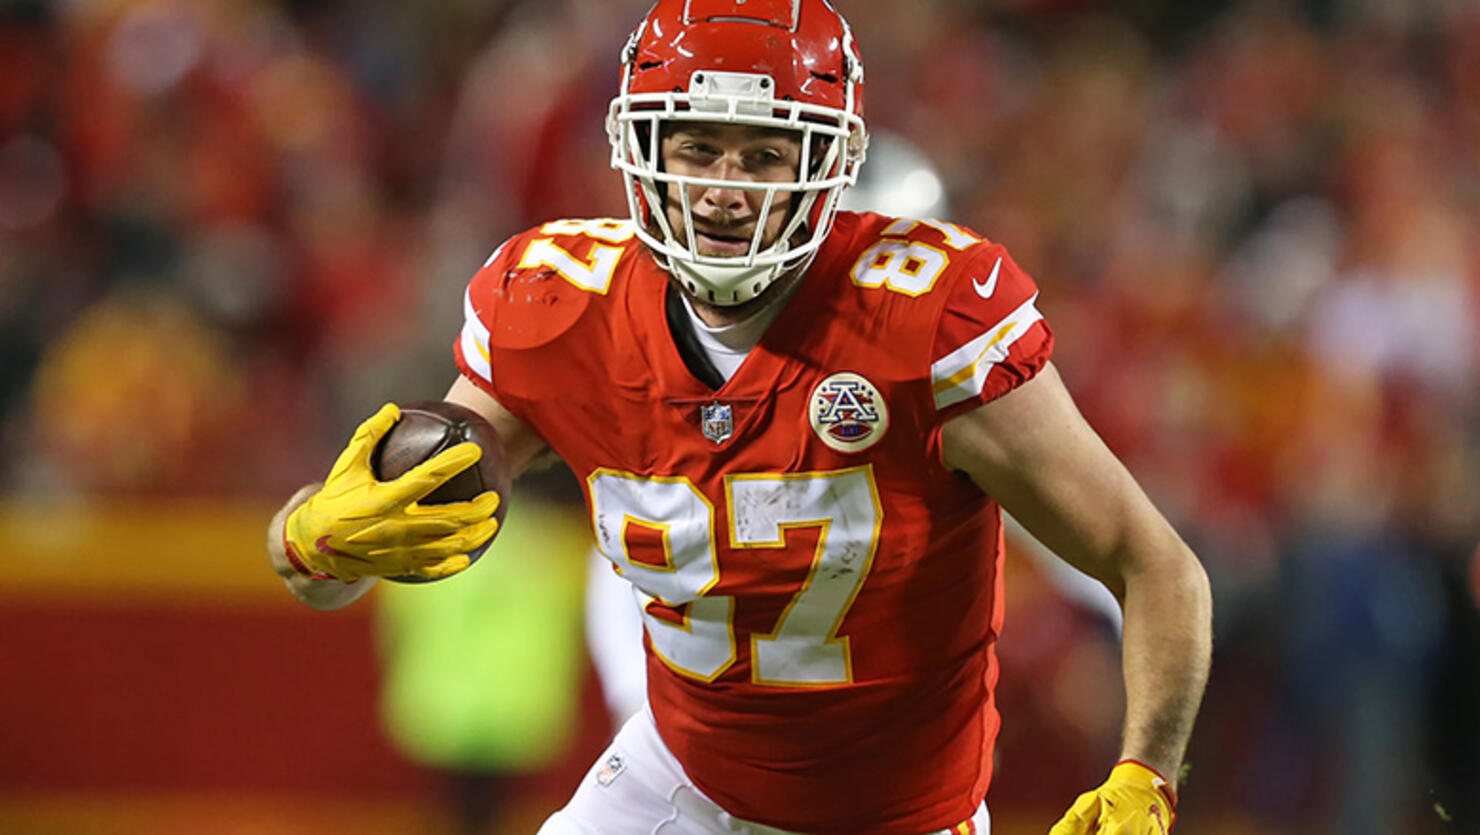 Kansas City Chiefs tight end Travis Kelce (87) runs after the catch for a 25-yard reception early in the fourth quarter of an NFL game between the Oakland Raiders and Kansas City Chiefs 